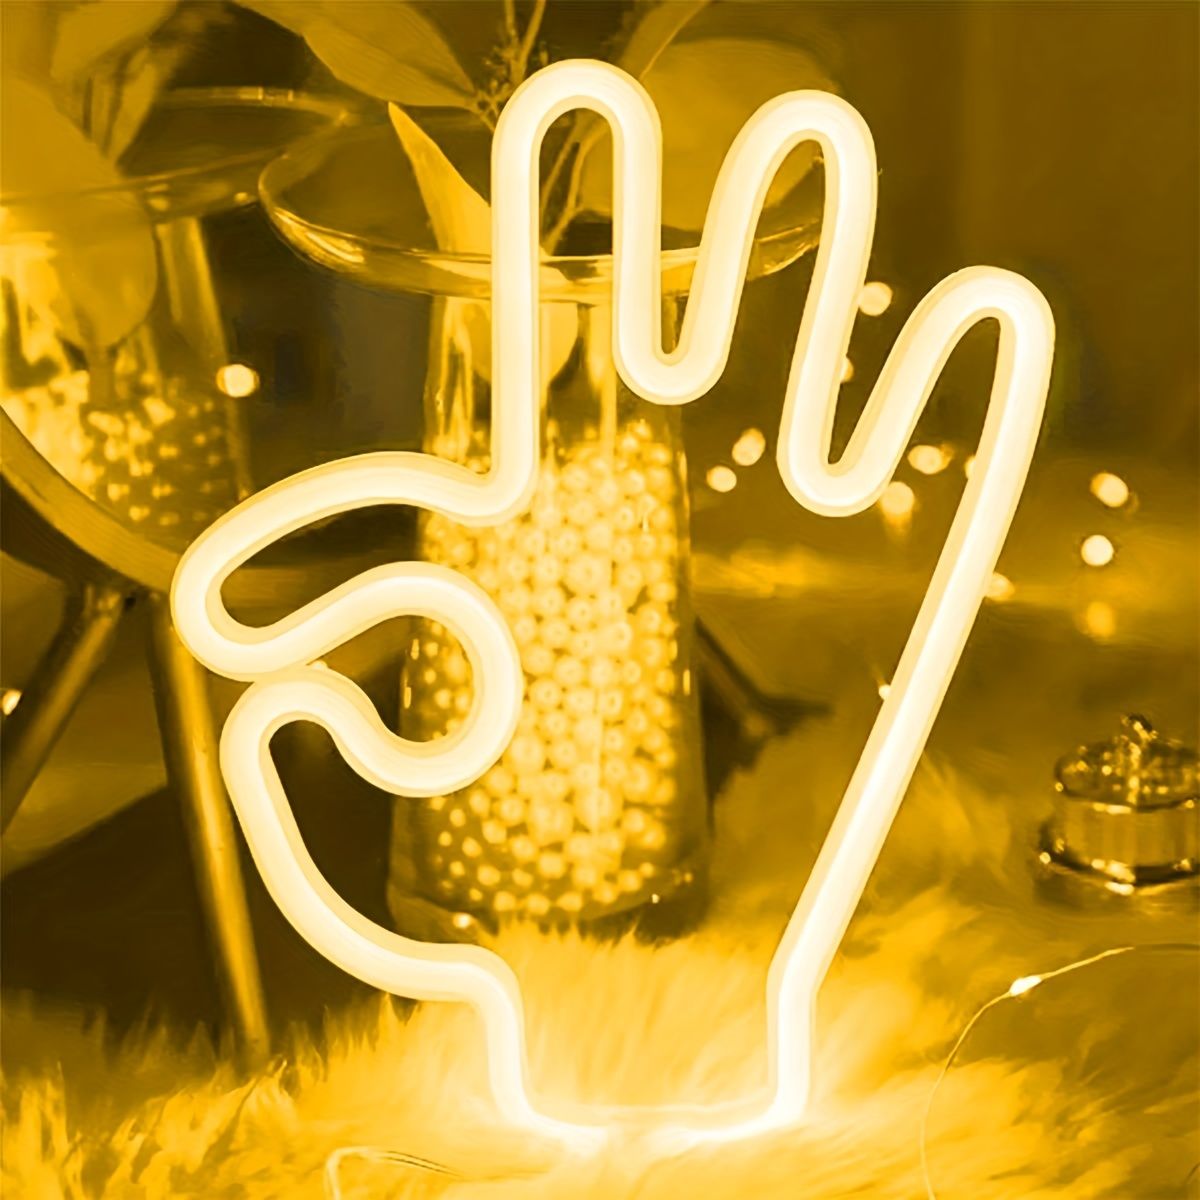 A neon sign in the shape of a hand giving the middle finger - Neon yellow